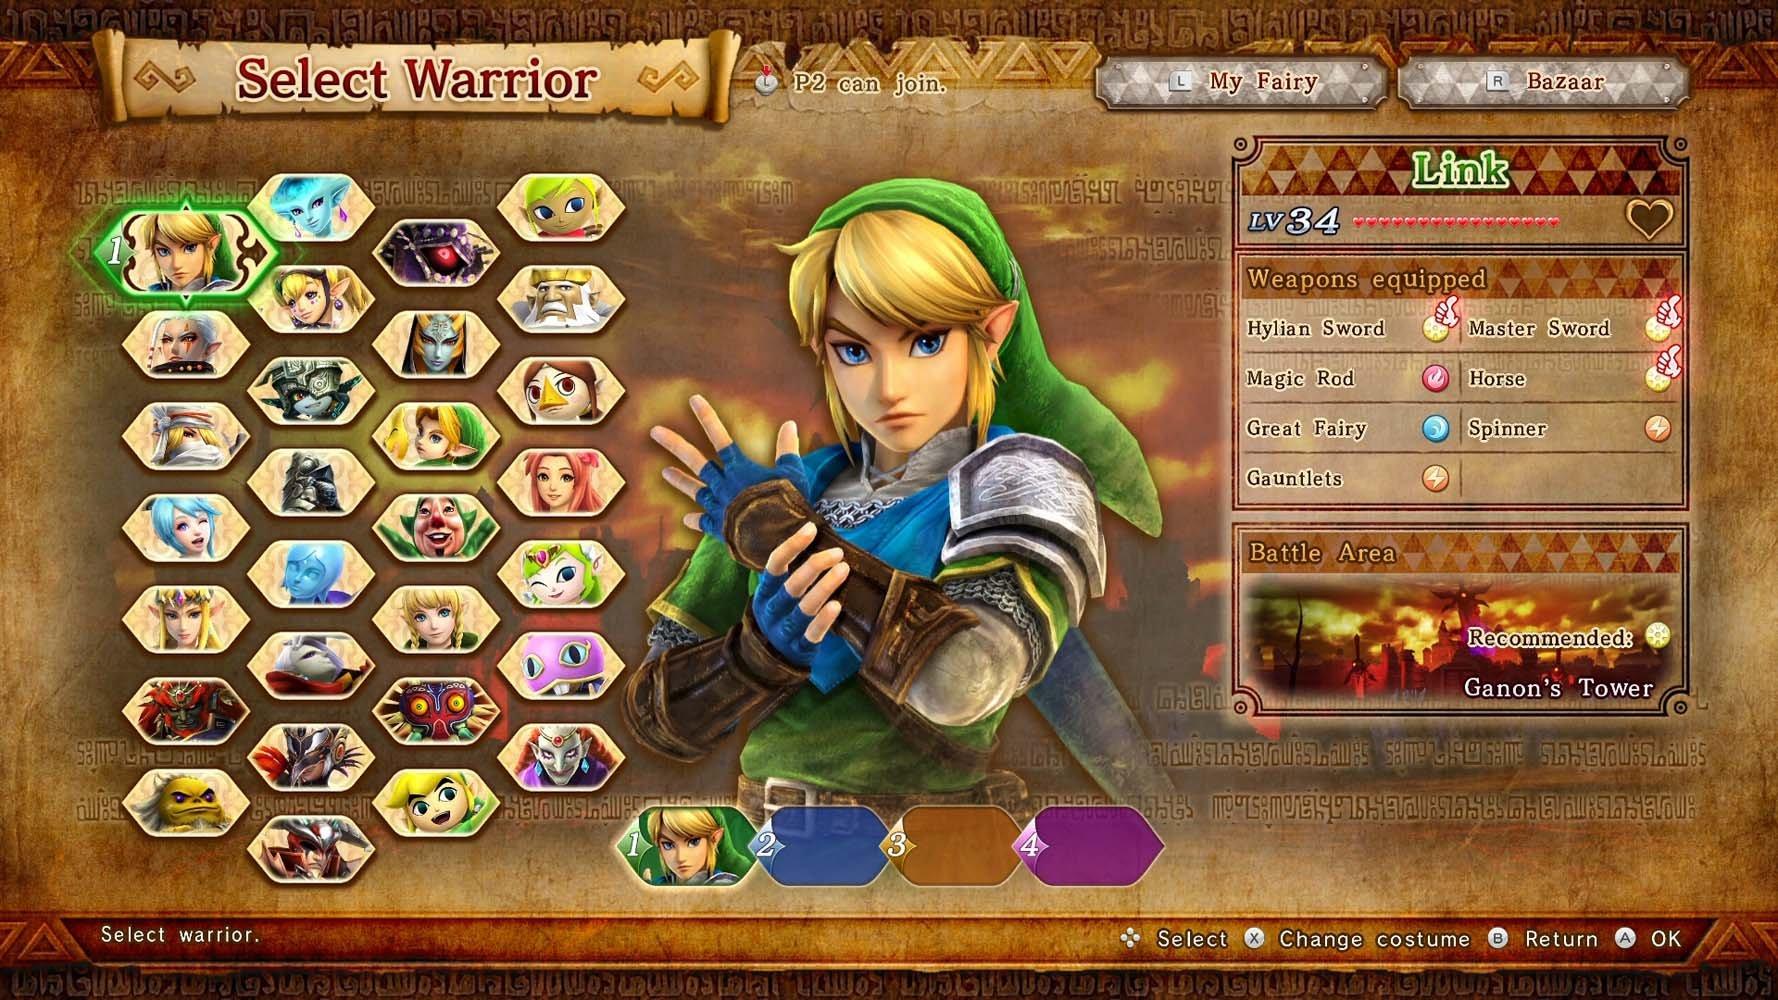 hyrule warriors definitive edition used